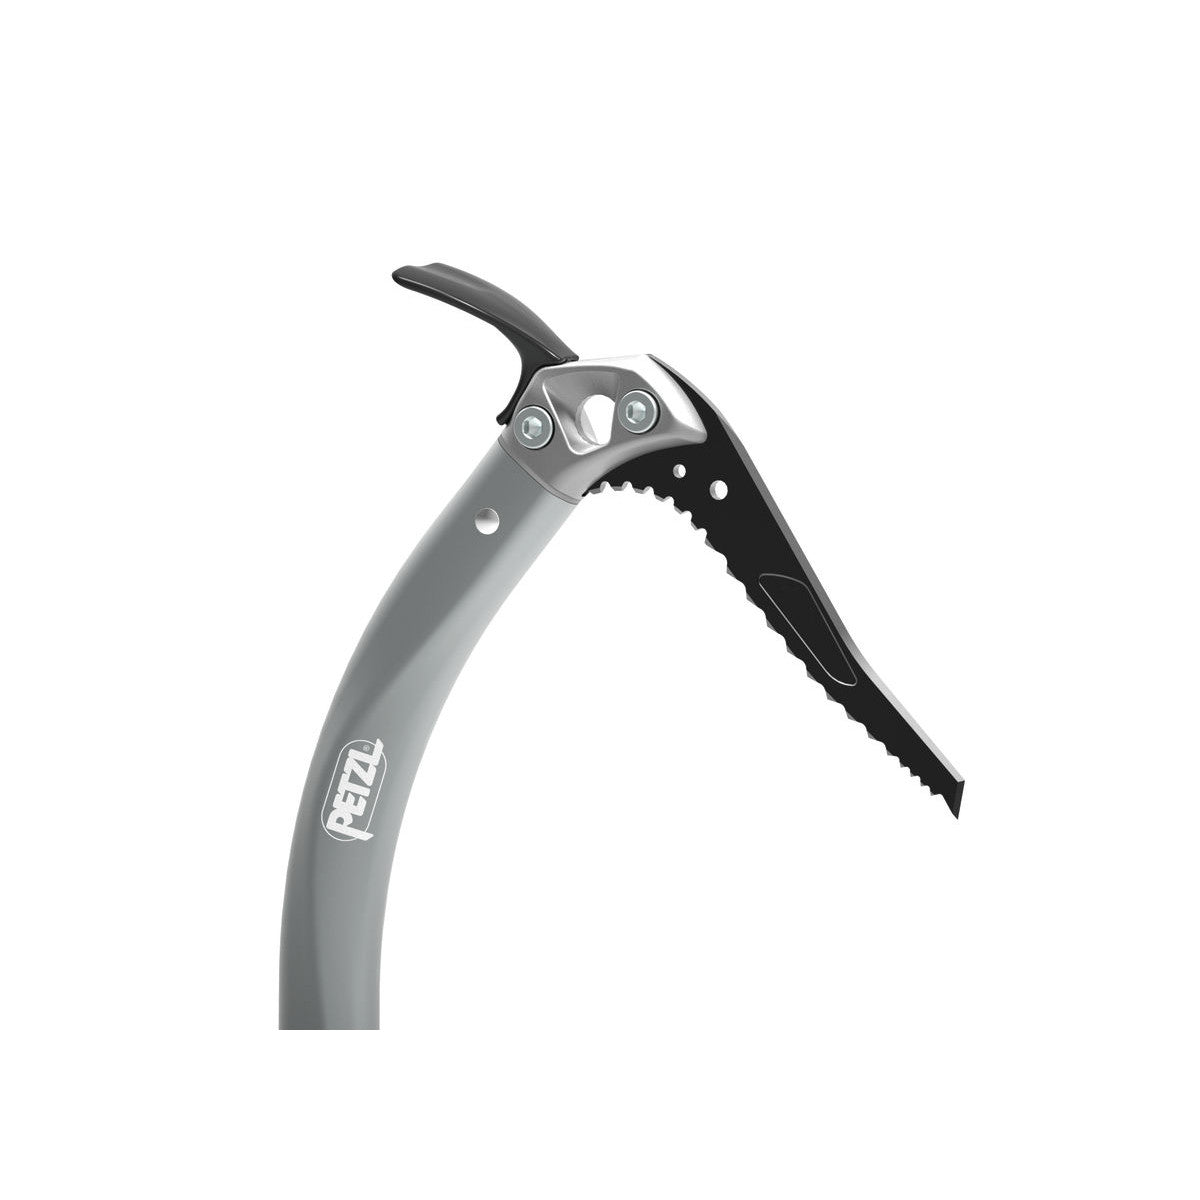 Petzl Quark Ice Axe, close up showing top of the axe